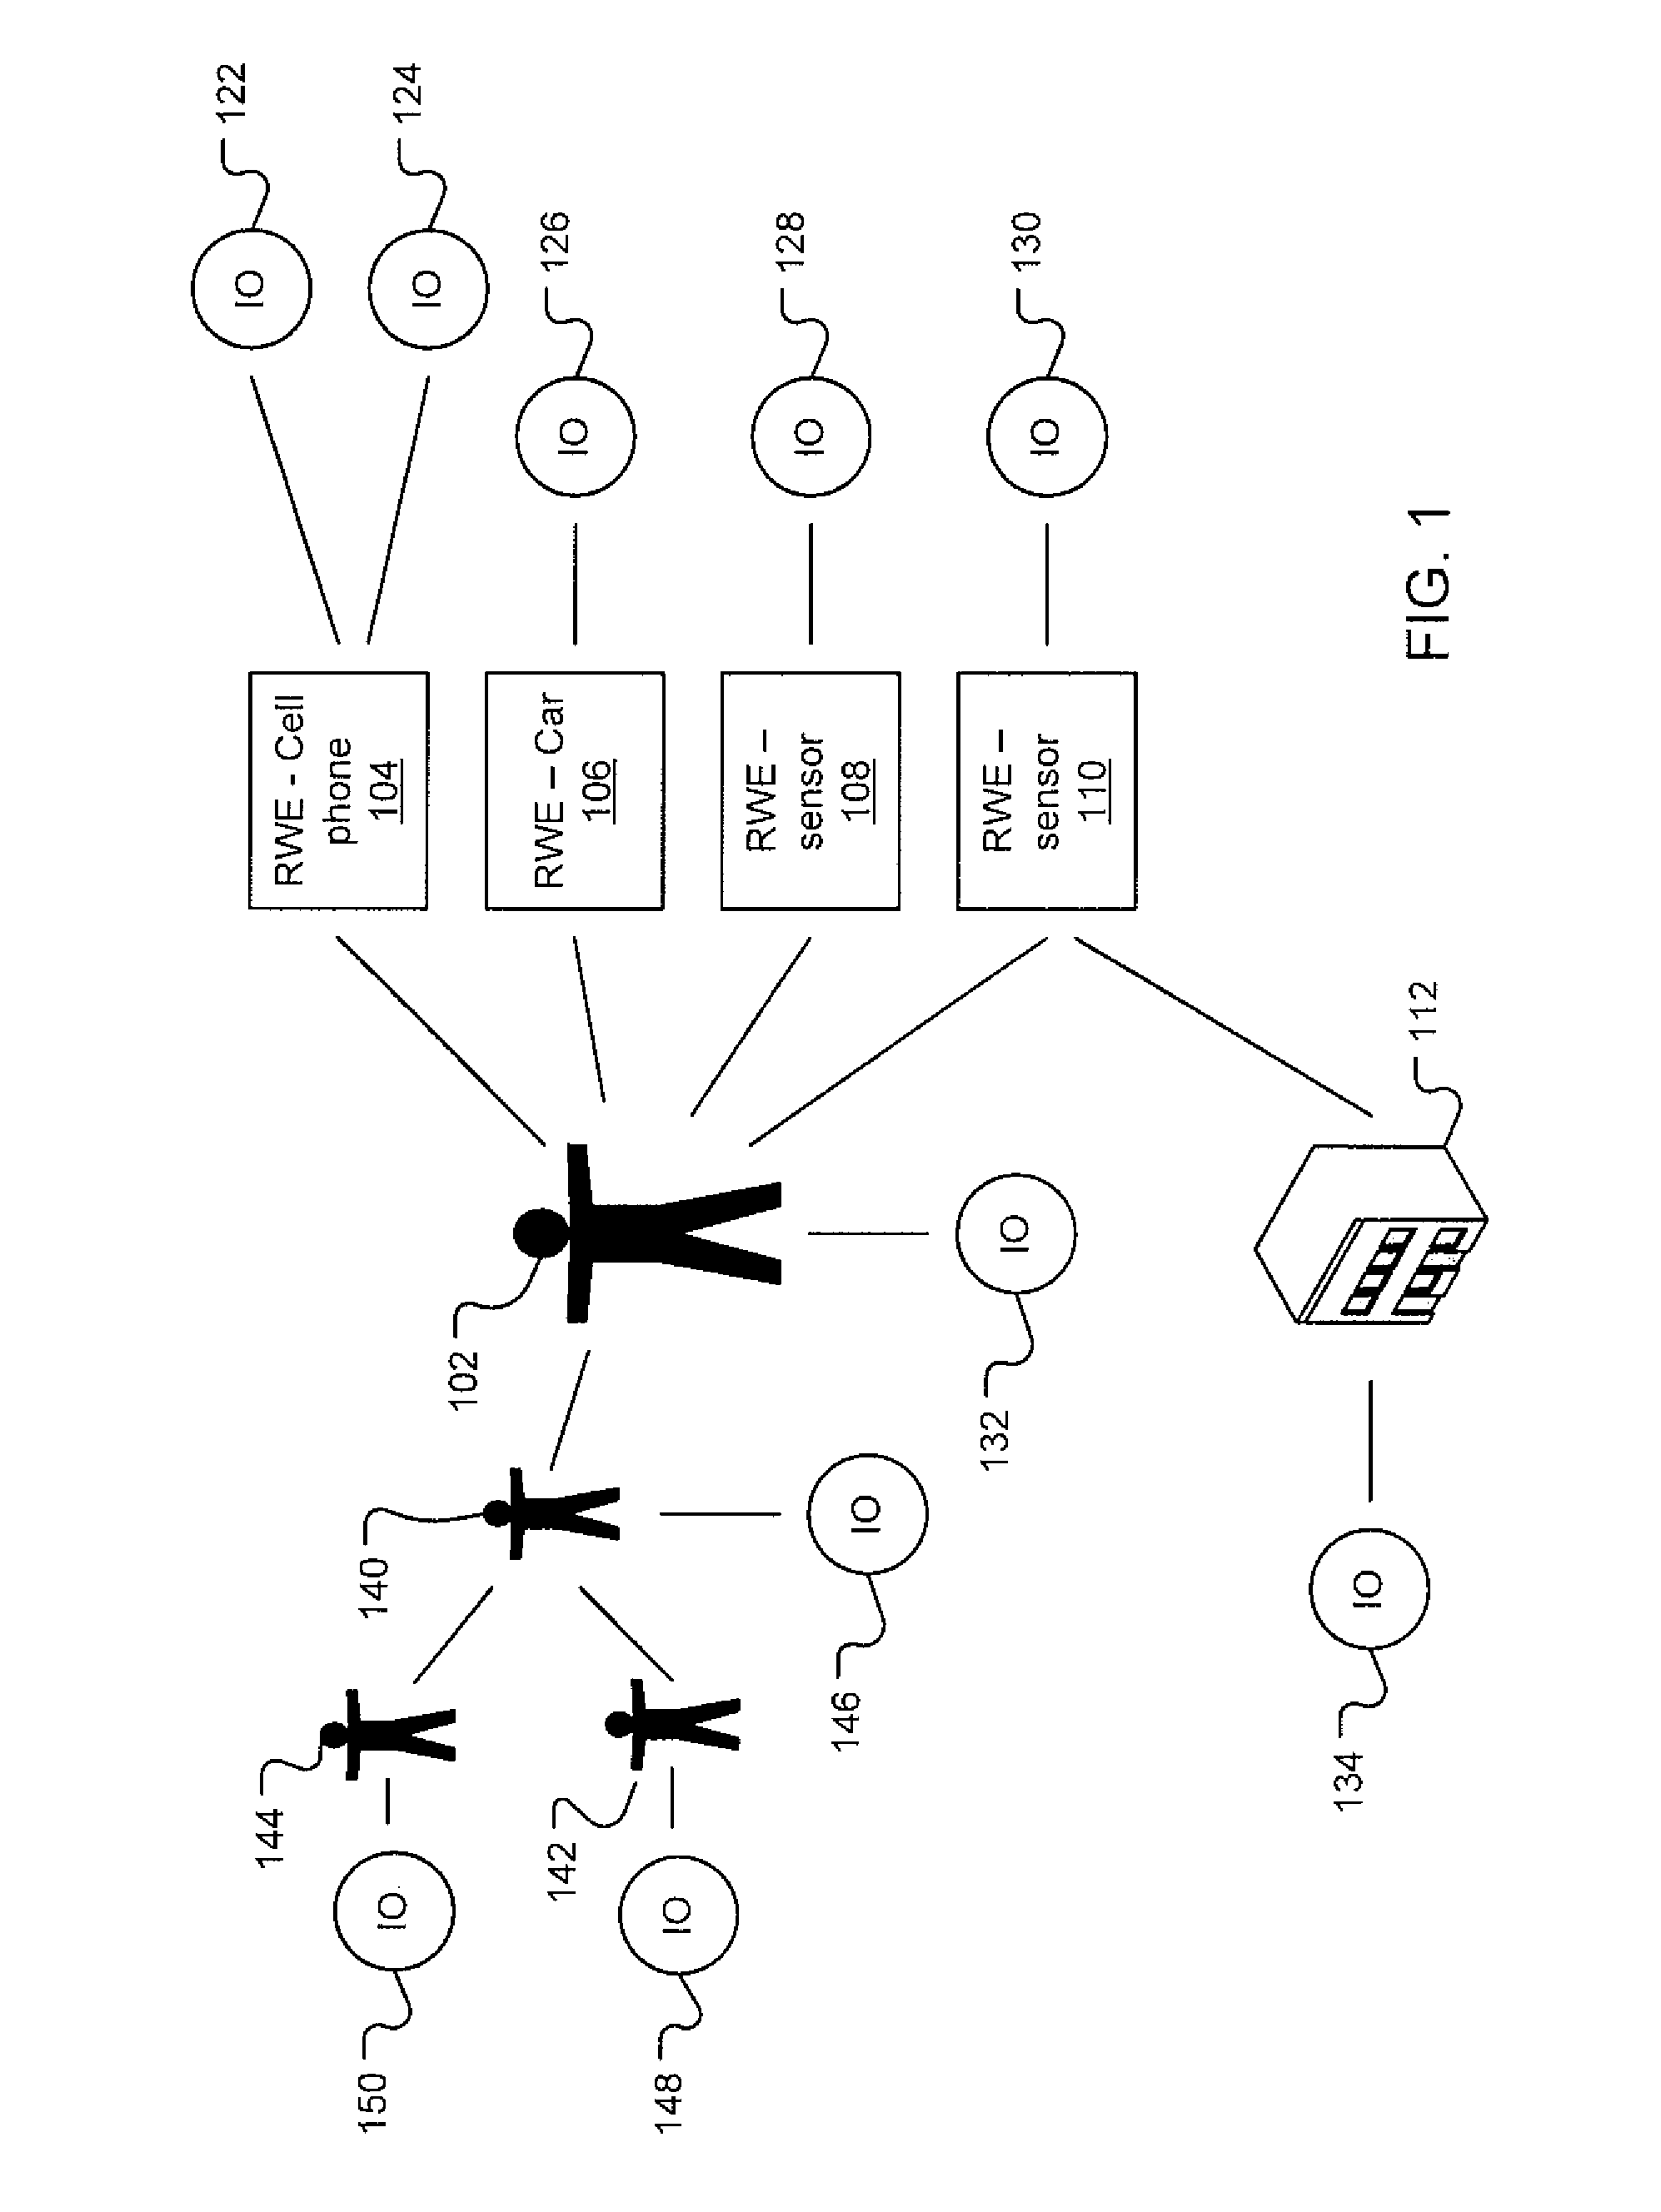 System and method for presentation of media related to a context